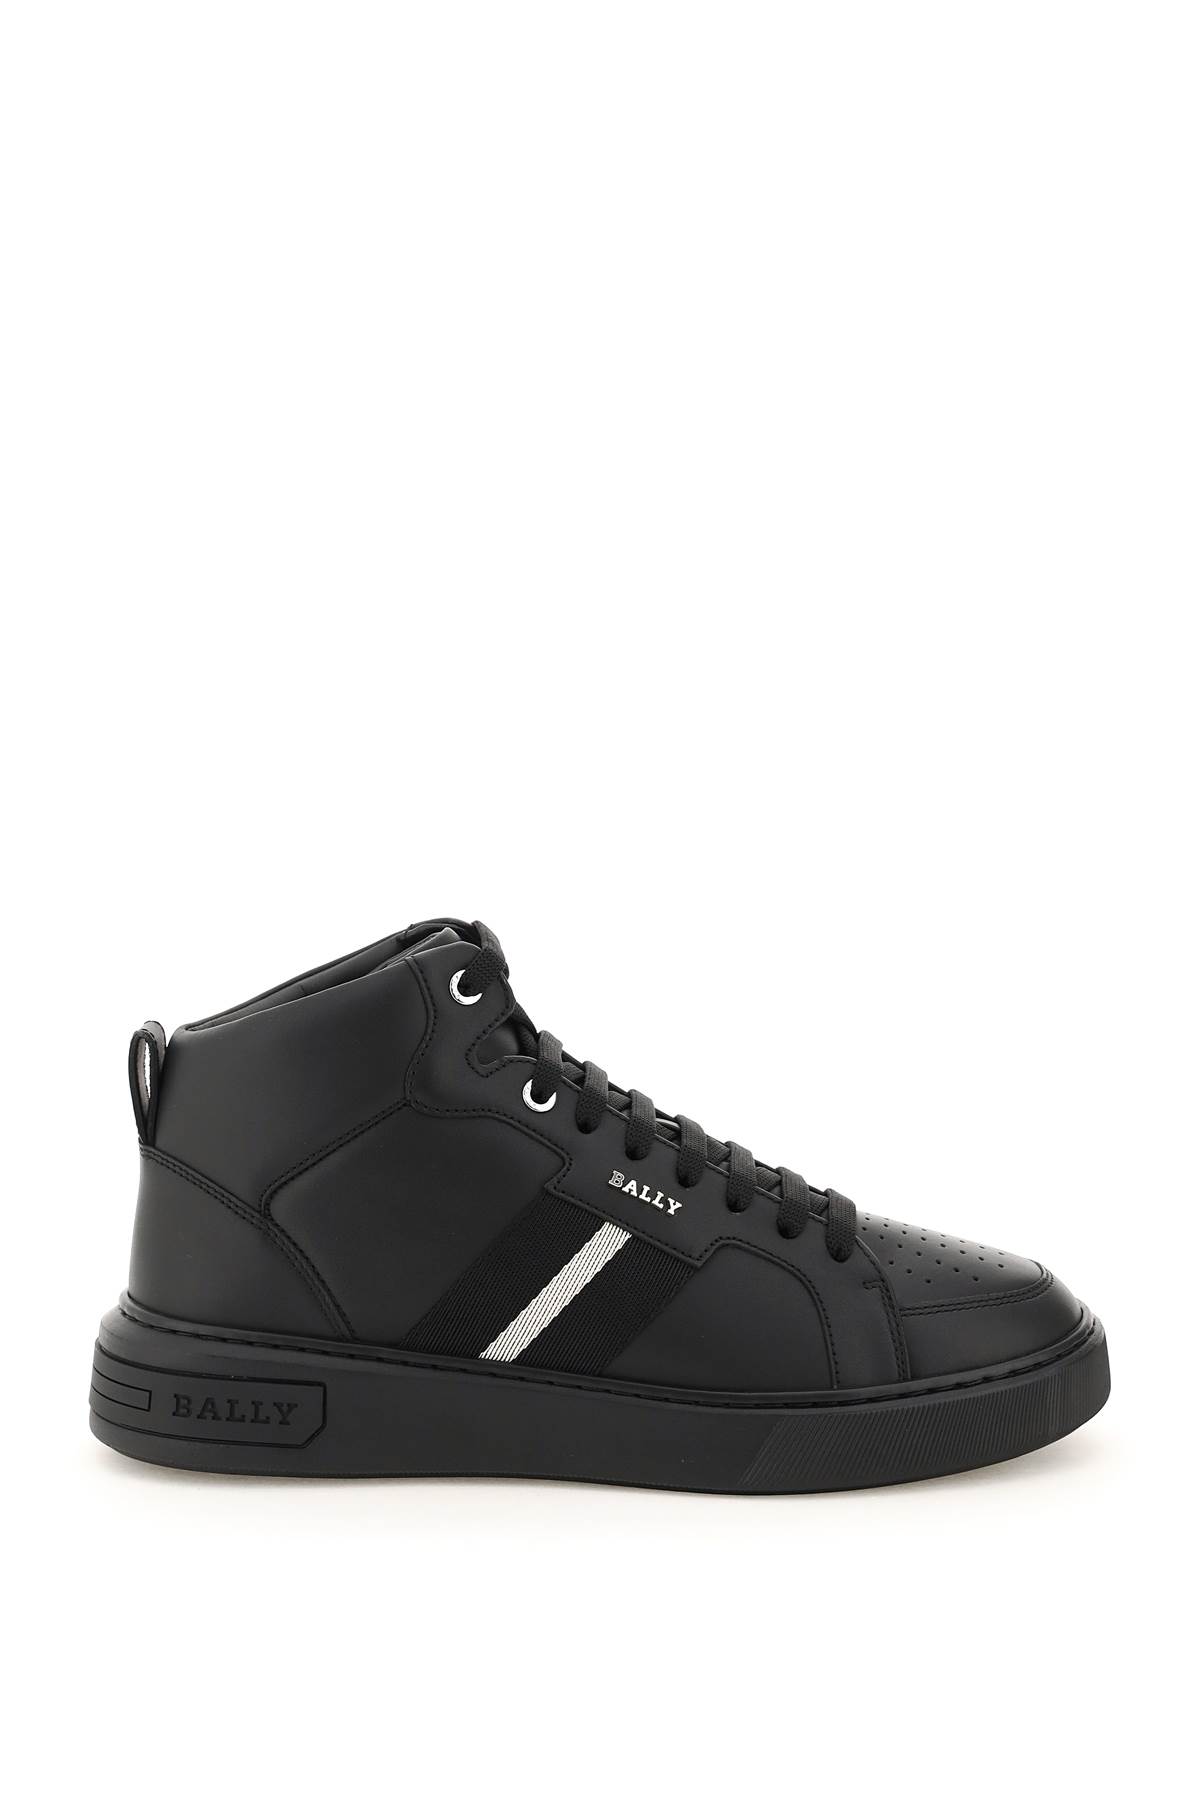 Bally Myles Leather High Sneakers